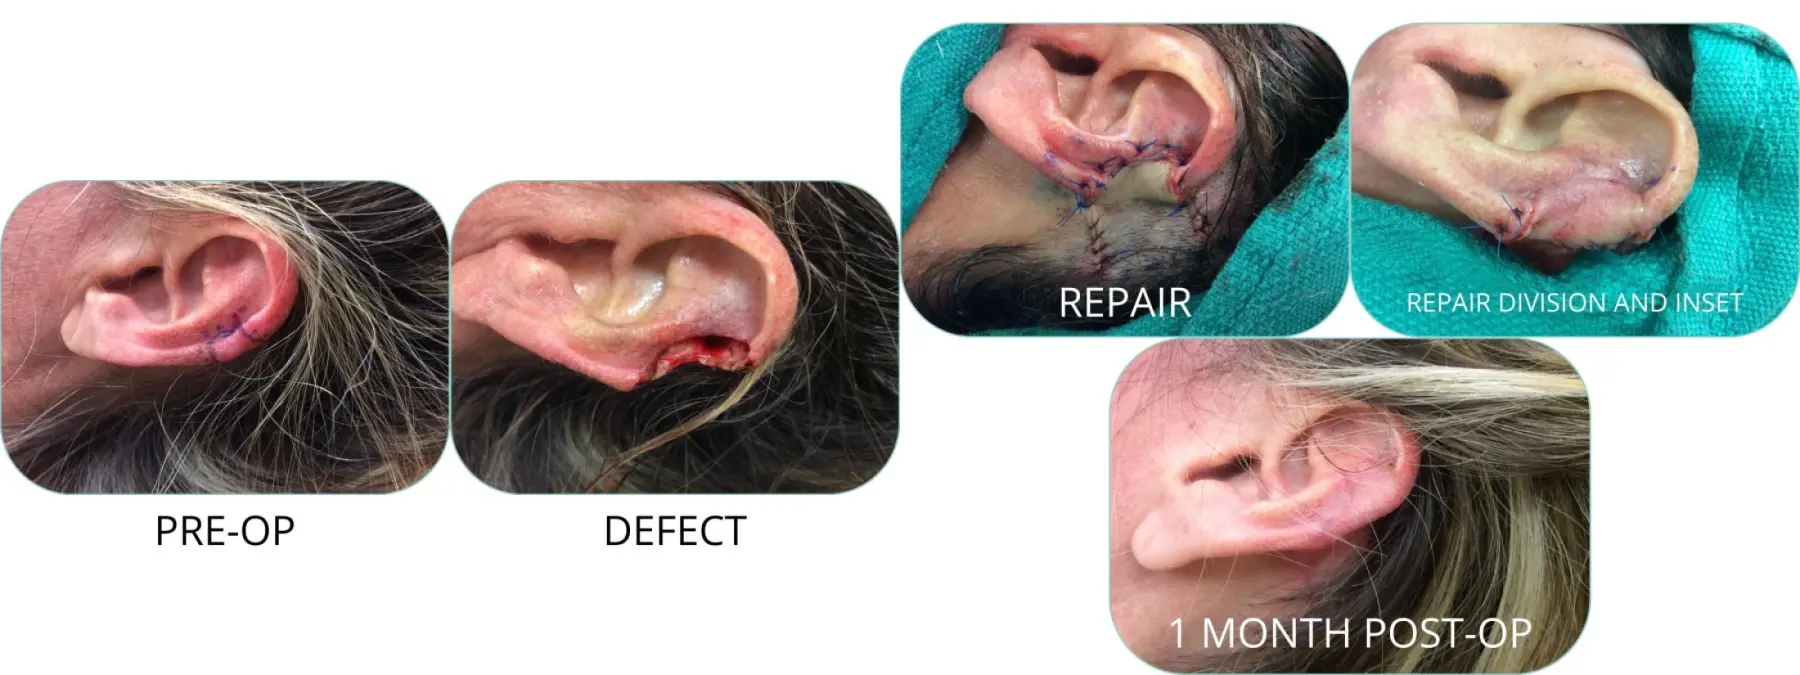 Basal Cell skin cancer, located on the ear - Mohs surgery - Before and After